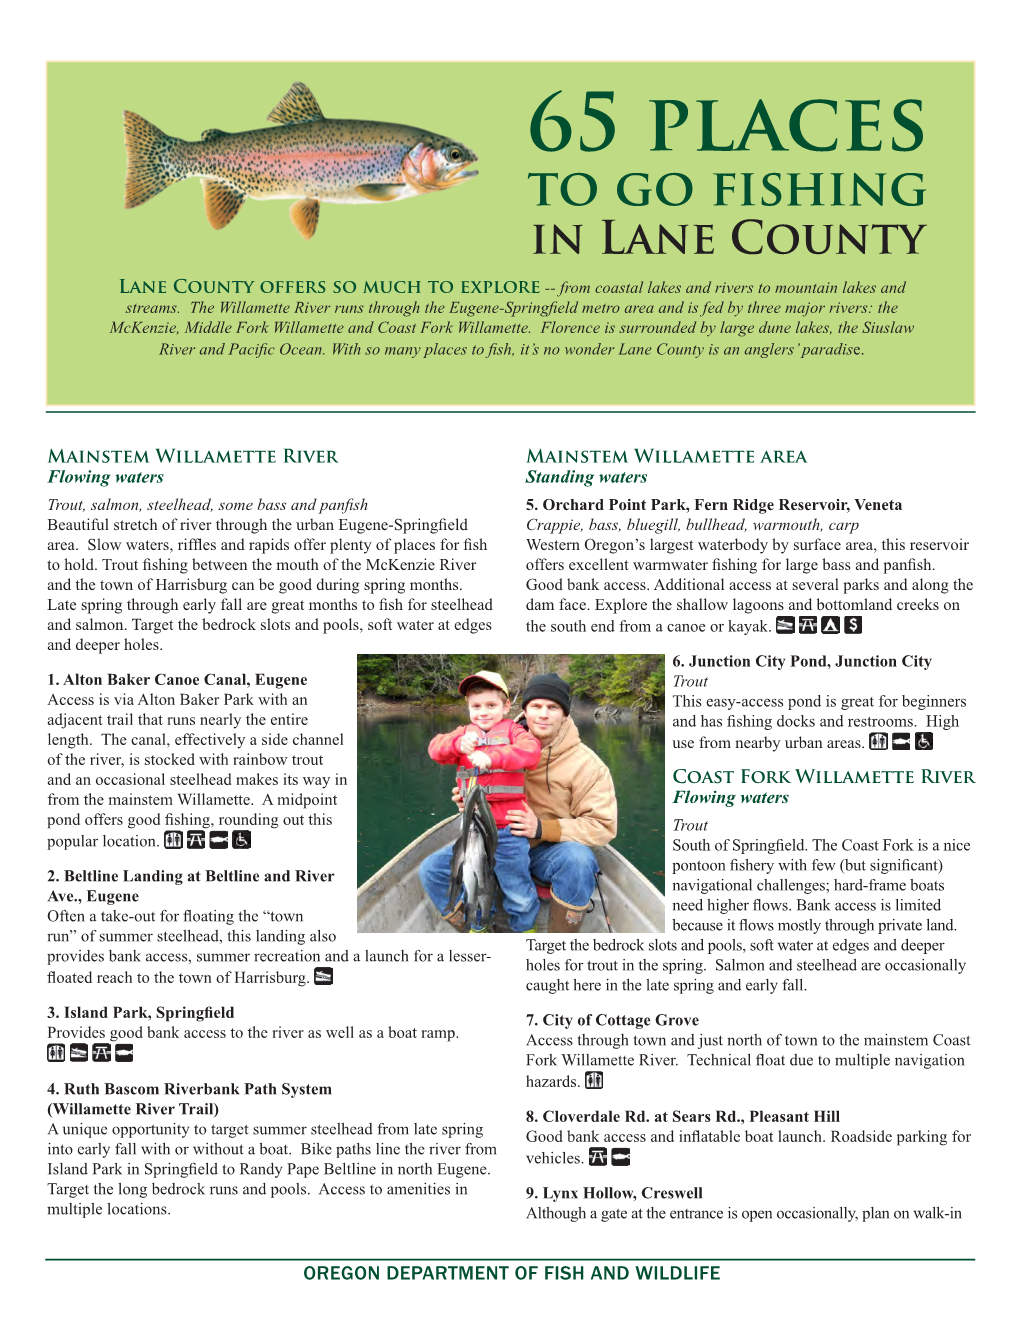 65 Places to Go Fishing in Lane County